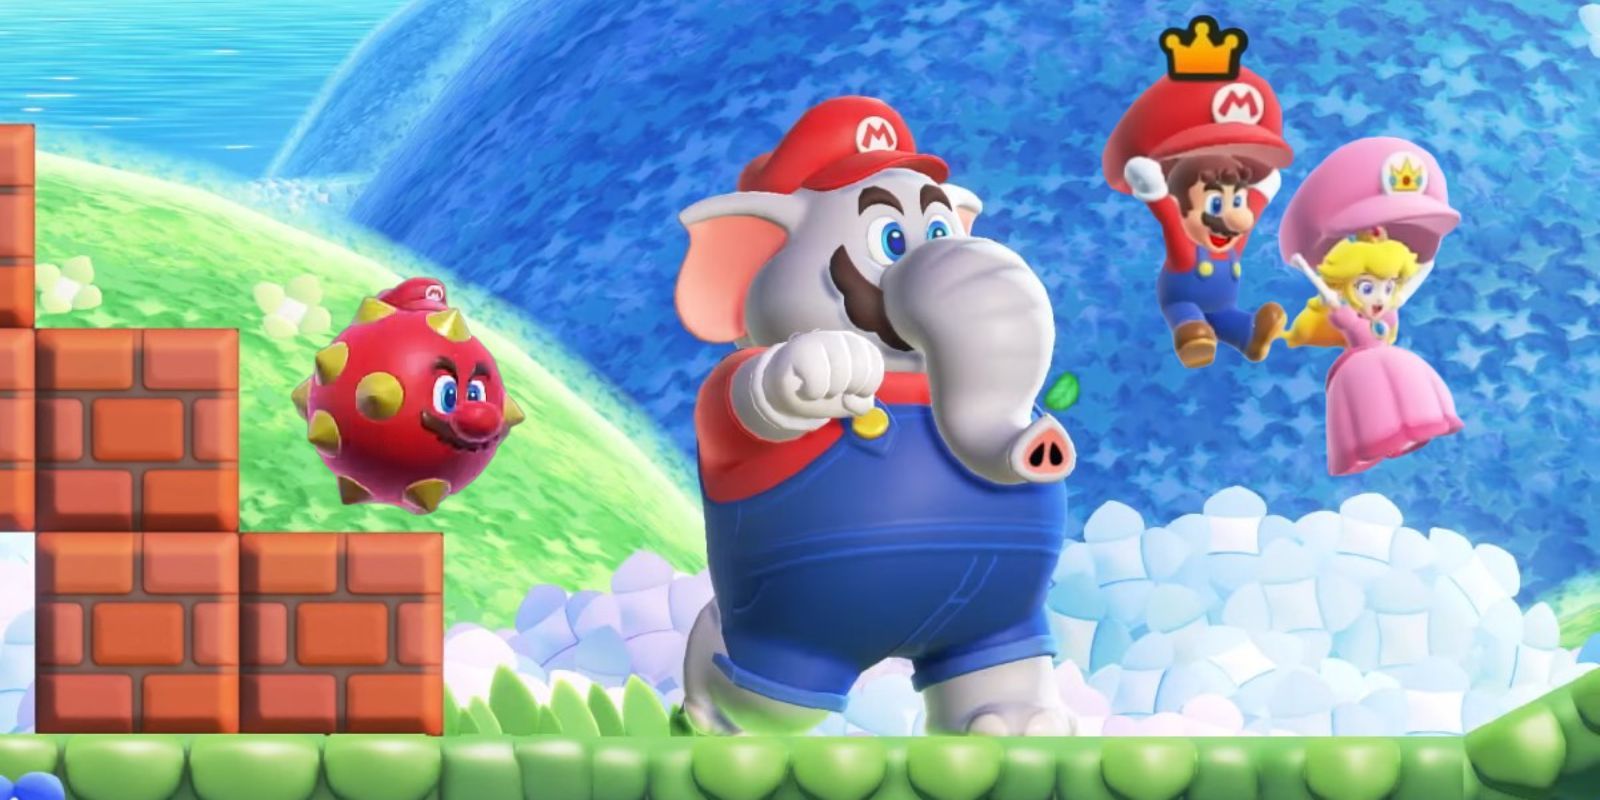 Power-Ups In Super Mario Bros. Wonder showing spiky ball Mario, Elephant Mario, and Mario and Peach with Parachute Hats